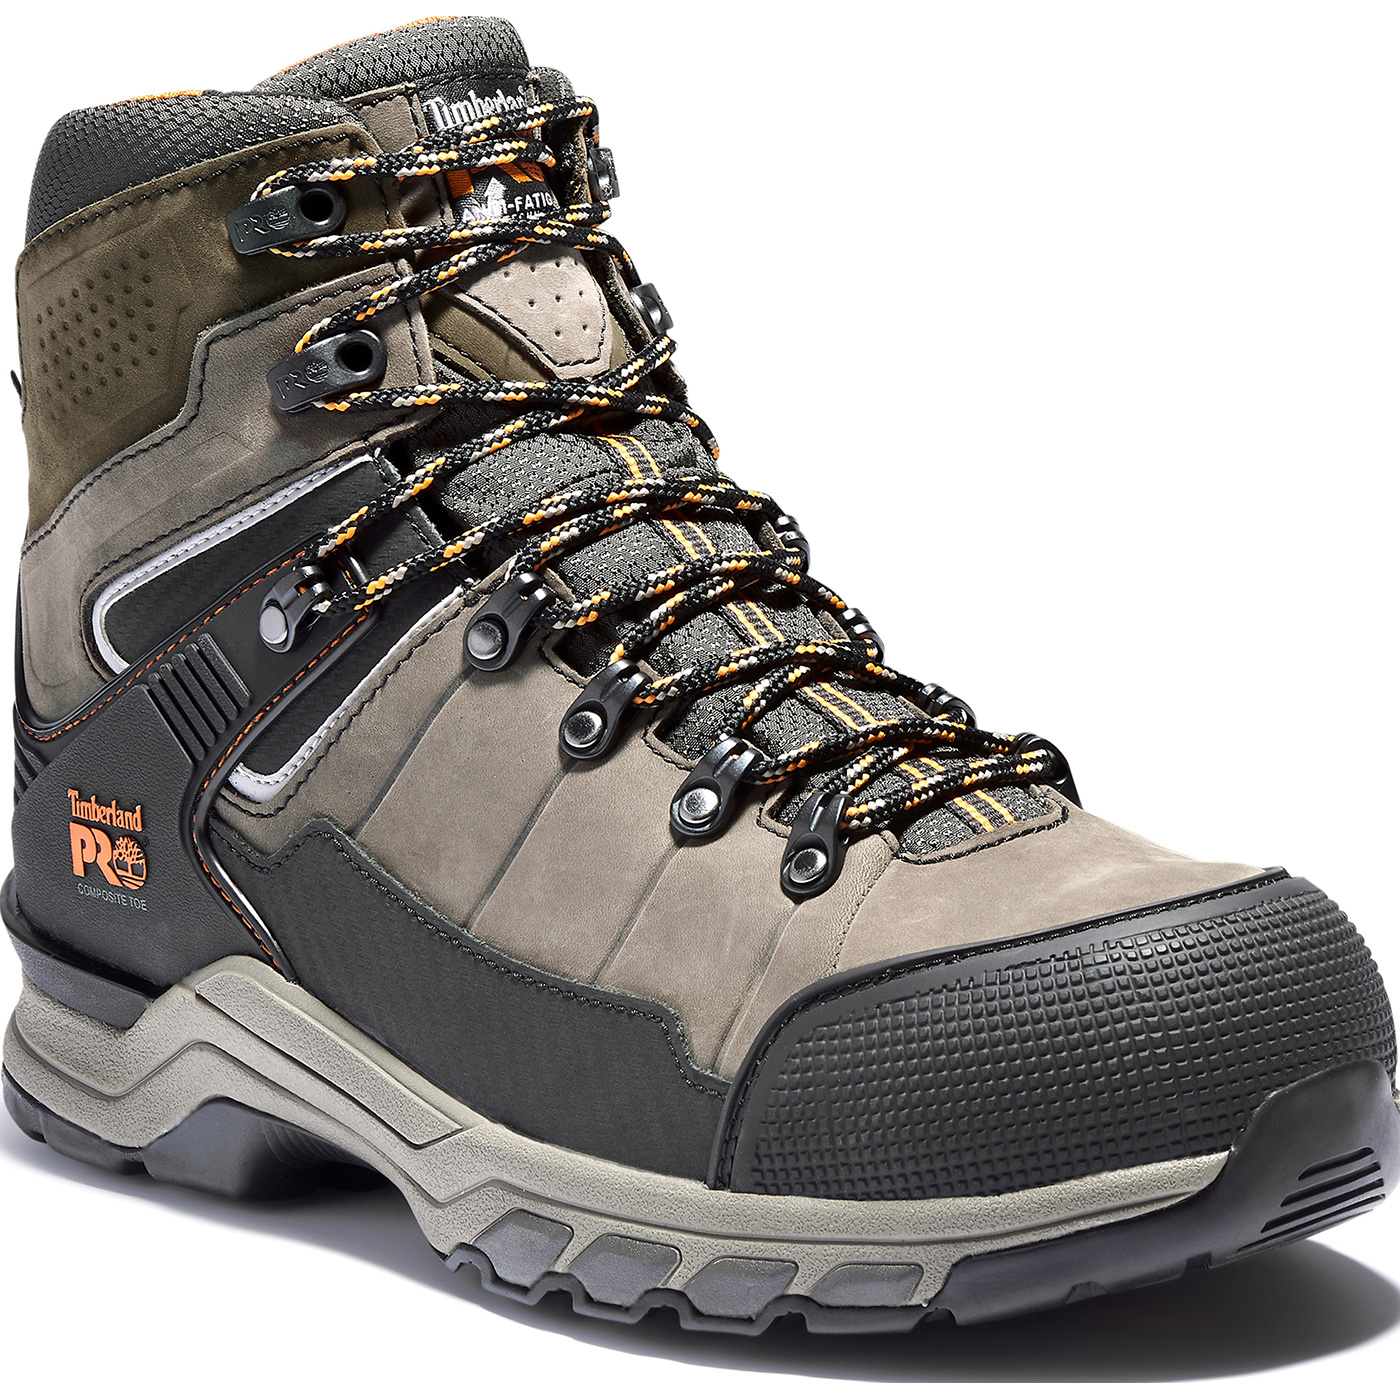 Buy the Timberland PRO TRD 6 Inch Composite Toe Electrical Waterproof Work Hiker, A25GP